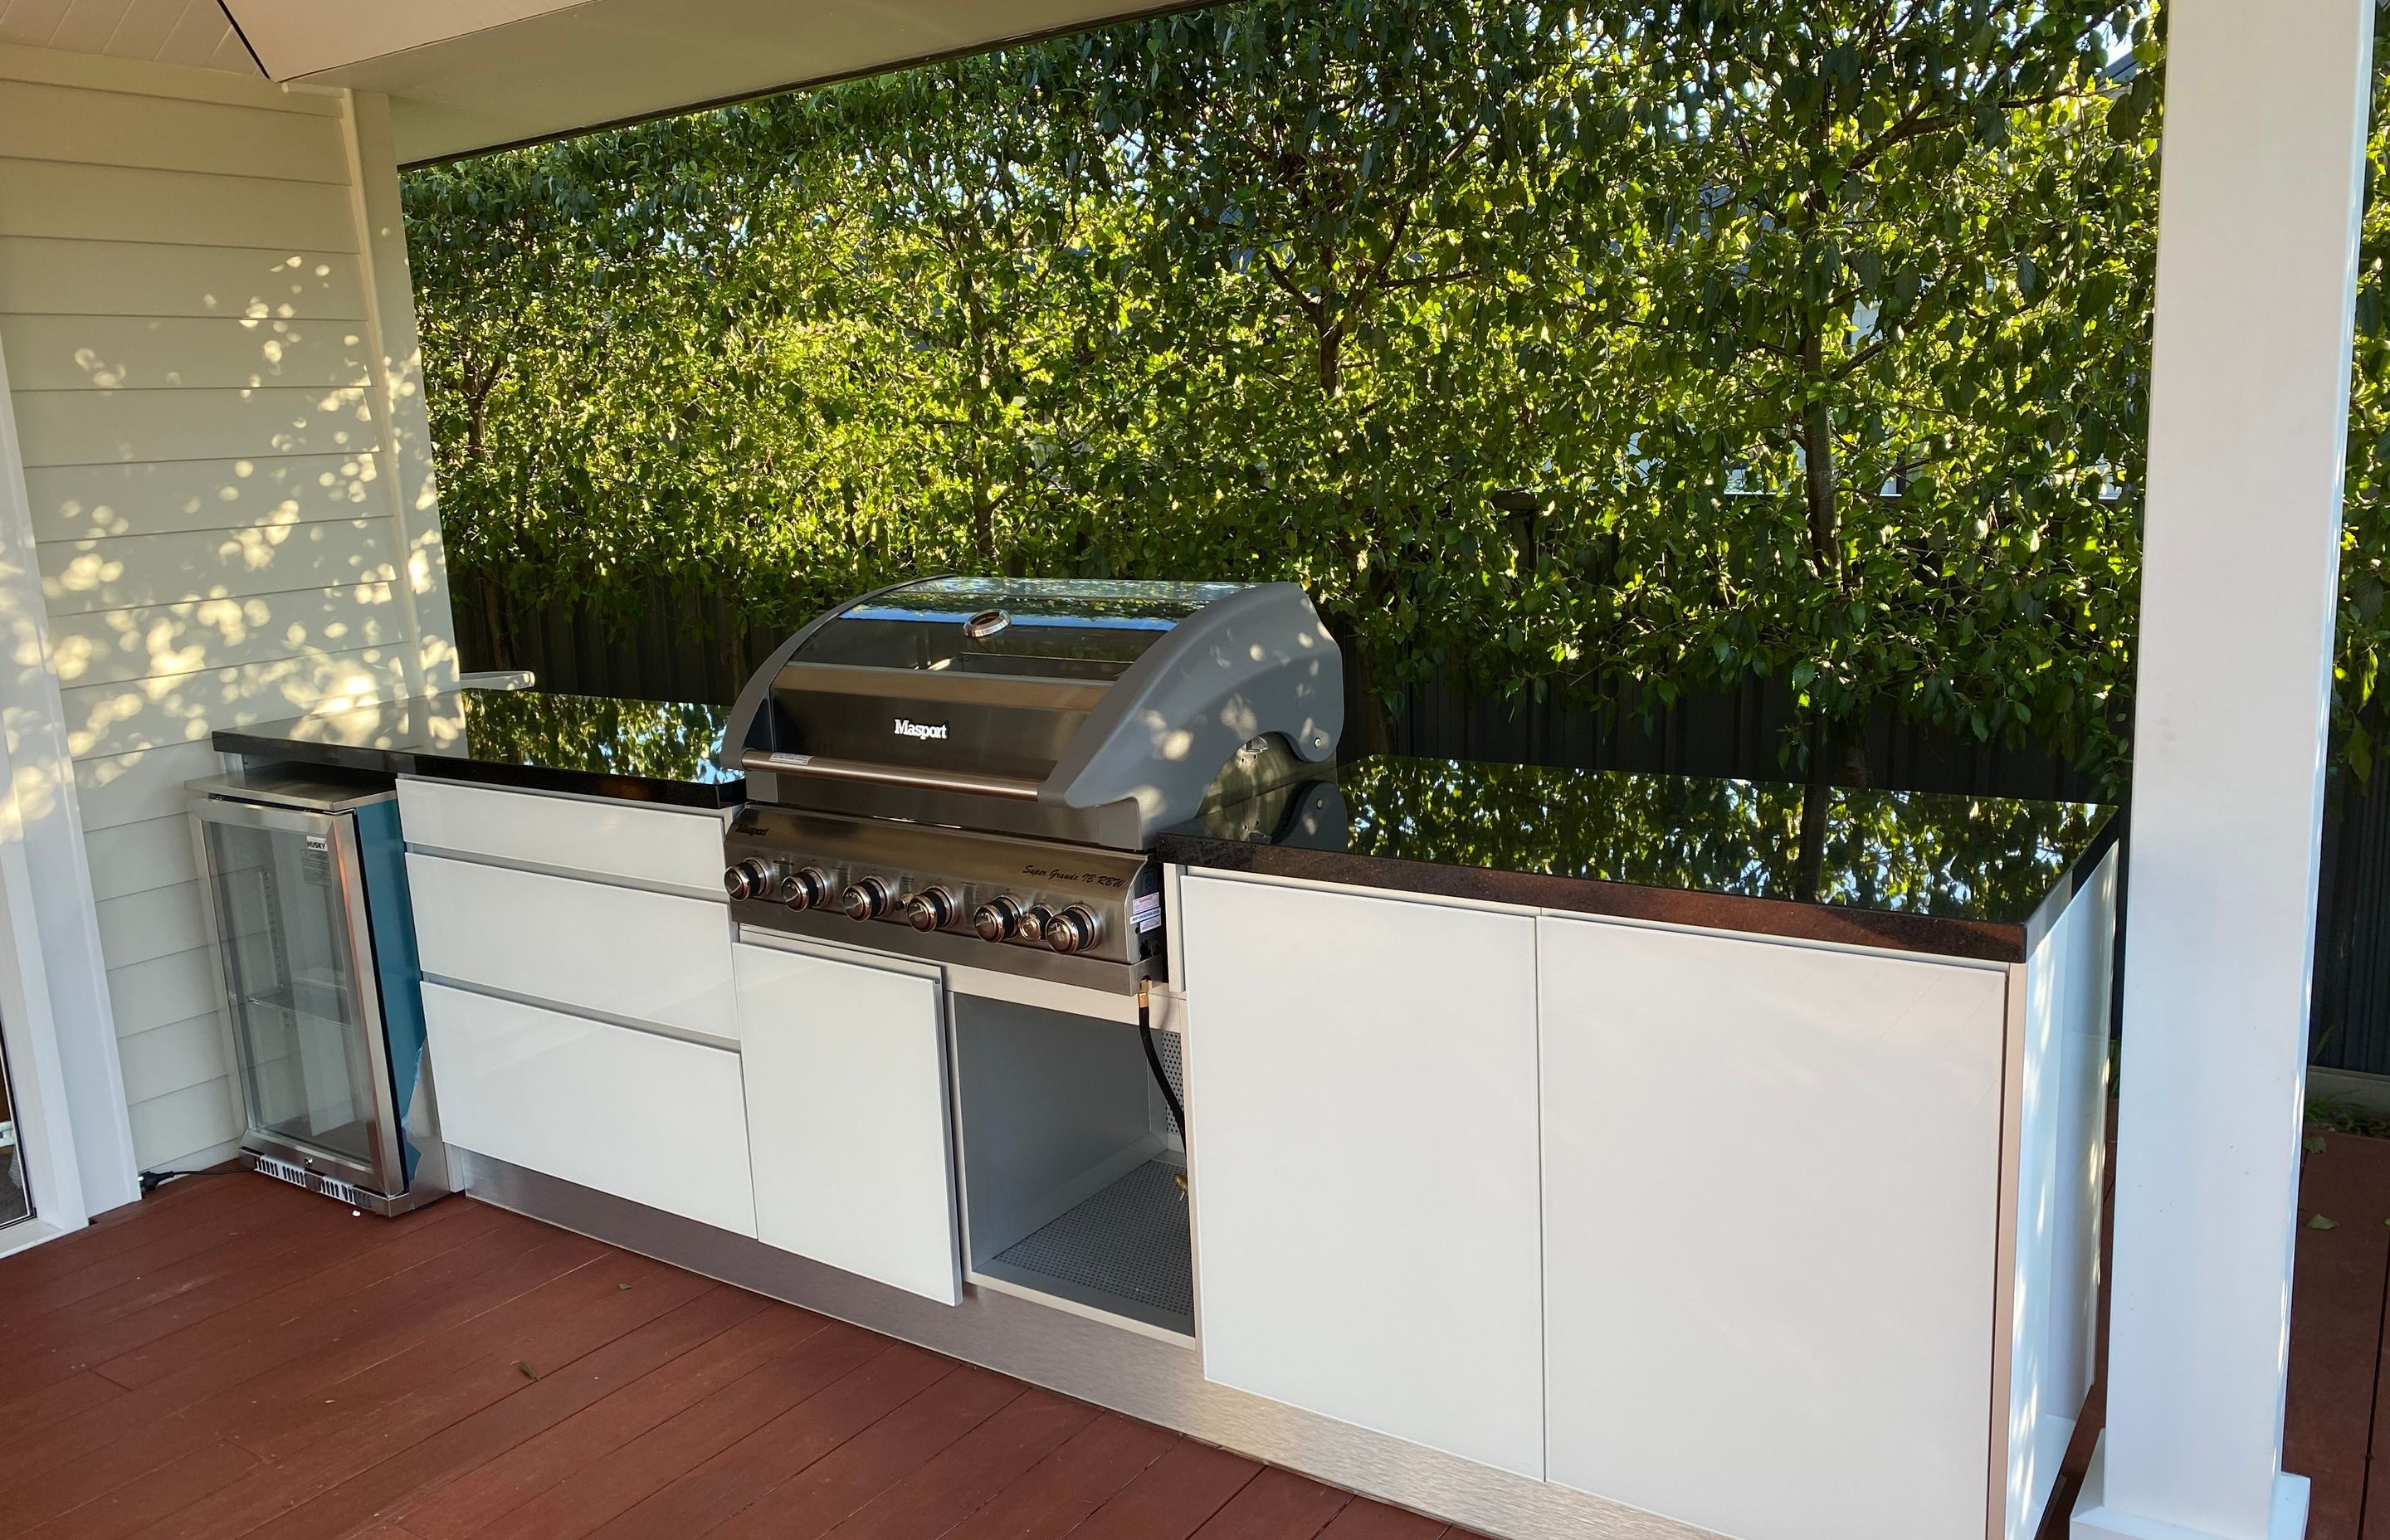 Aluminium kitchen cabinets are a great choice for outdoor kitchen storage.